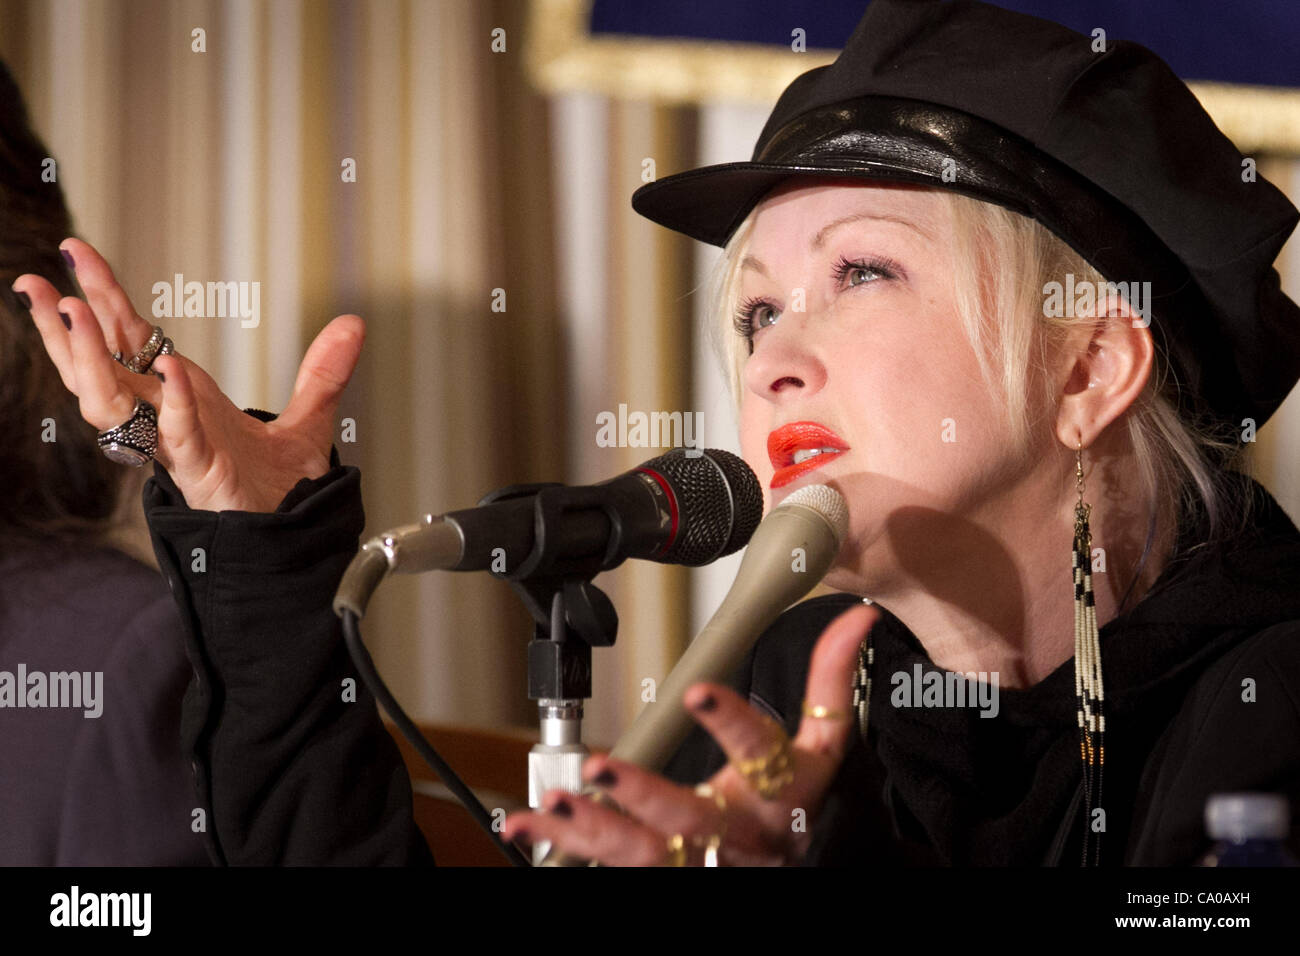 Cyndi Lauper, Mar 12, 2012 : Tokyo, Japan - American pop star Cyndi Lauper gestures as she appears before the domestic and foreign media during a news conference at Tokyos Foreign Correspondents Club of Japan  Stock Photo